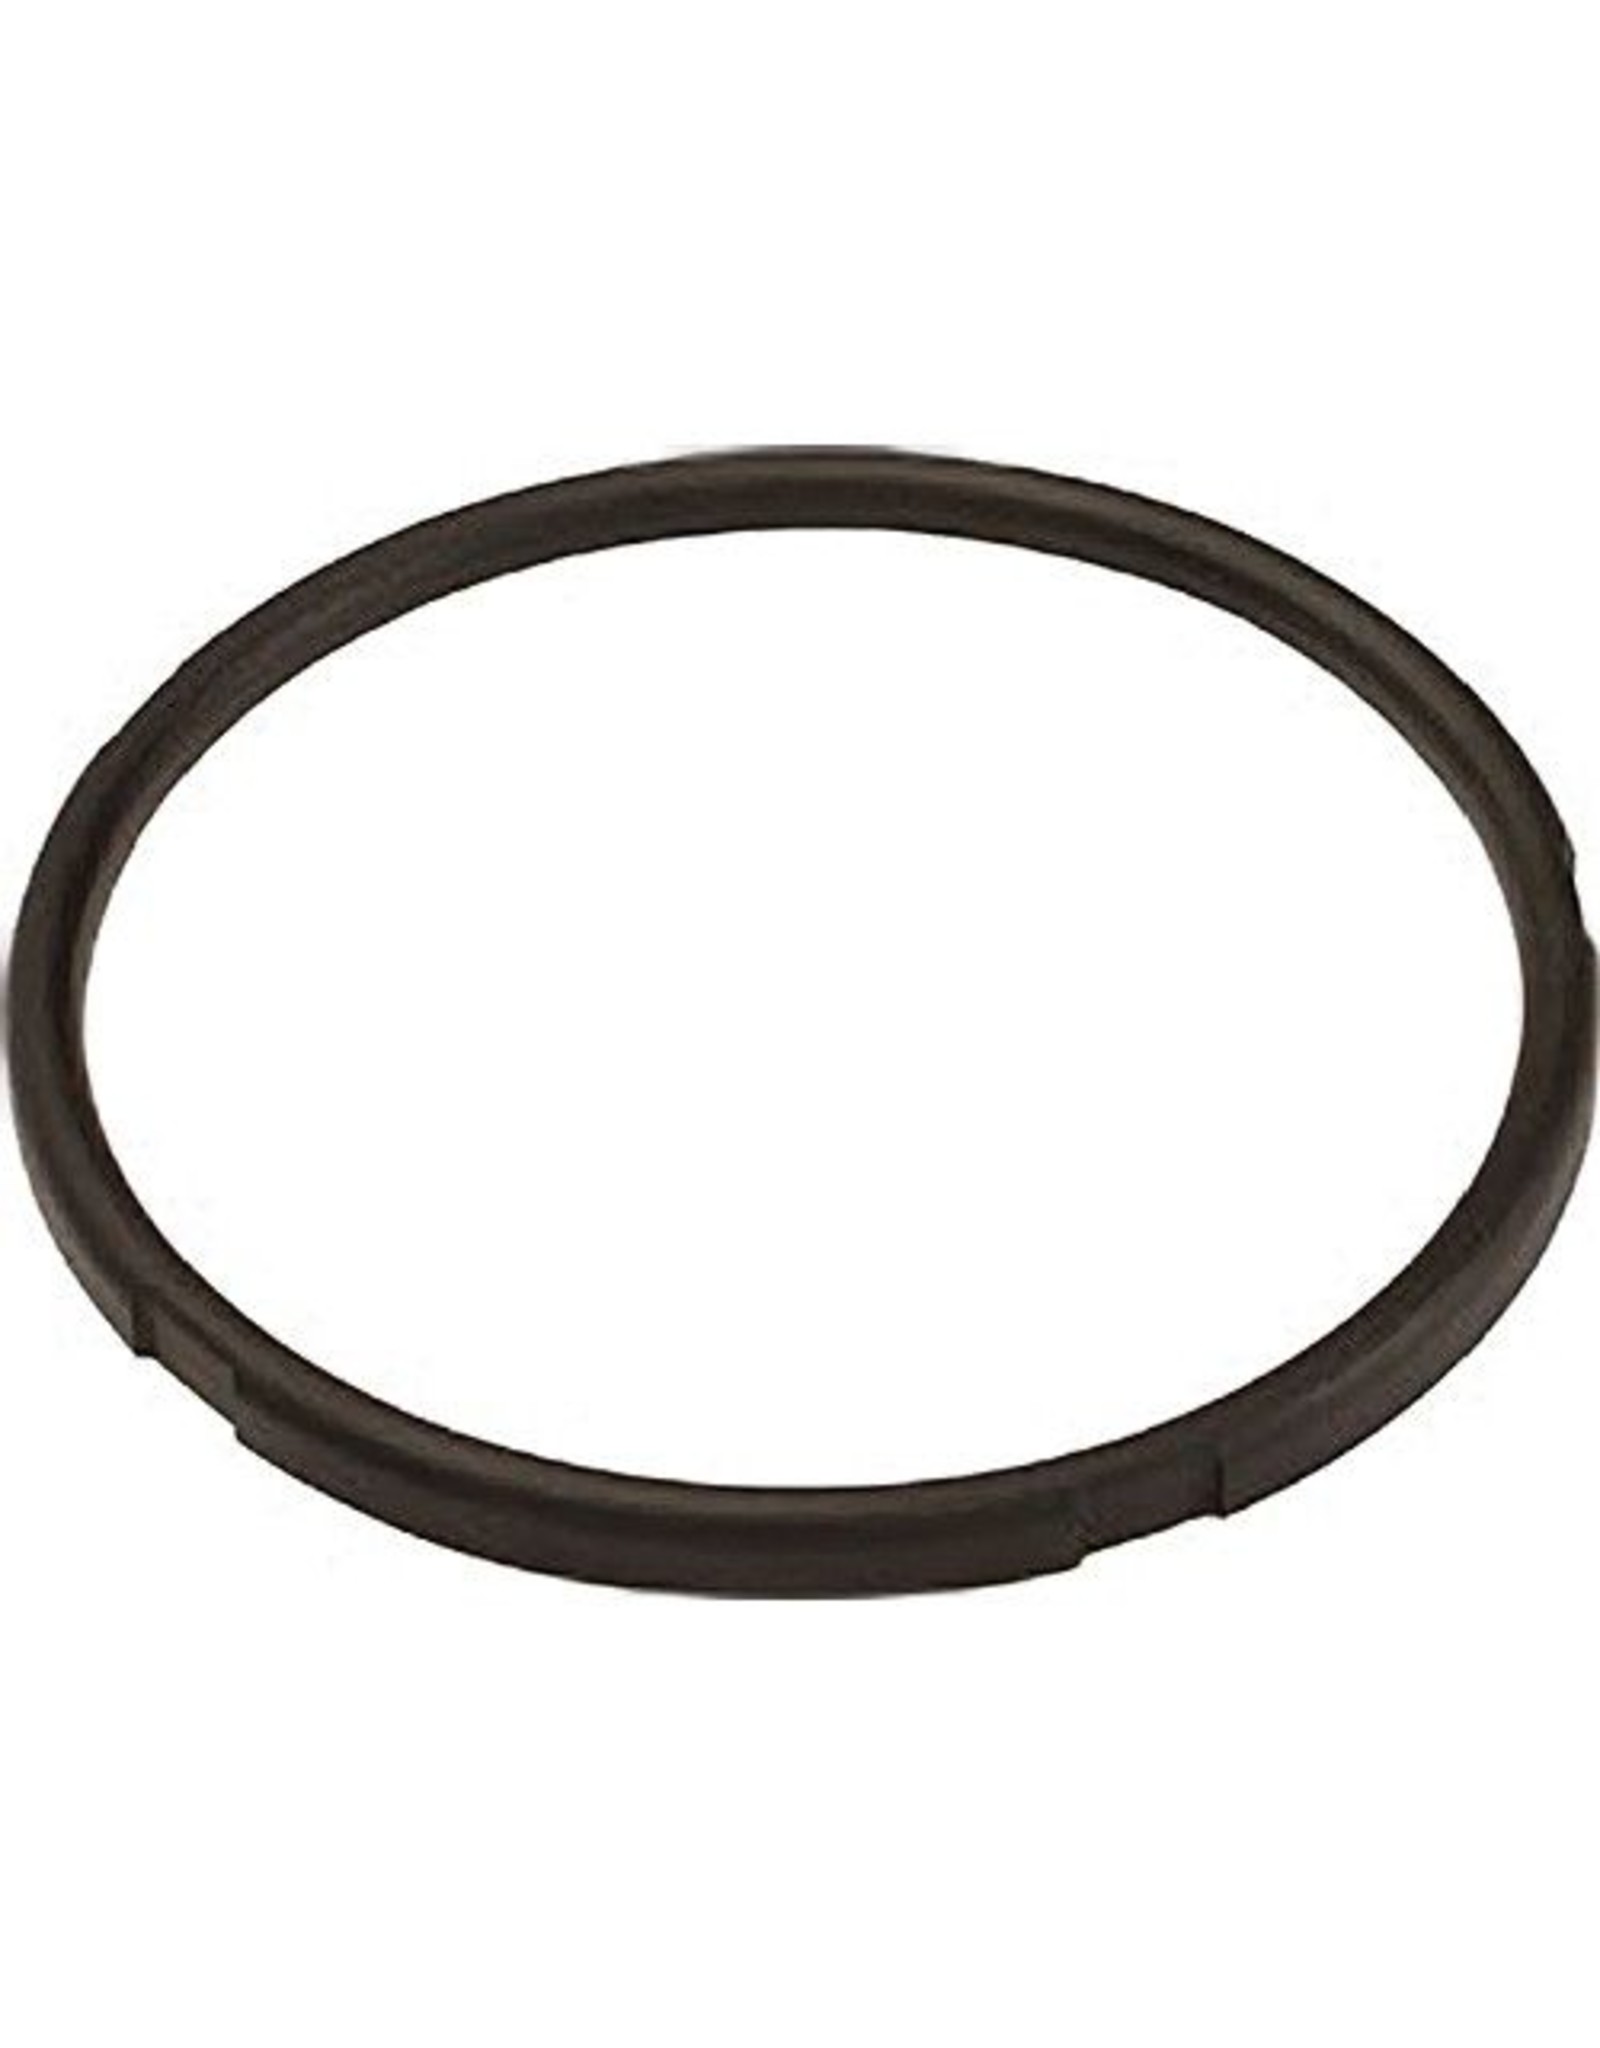 Roland 12" rubber hoop cover for PD-125BK, PD128S-BC, PD-128BC G2117503R0